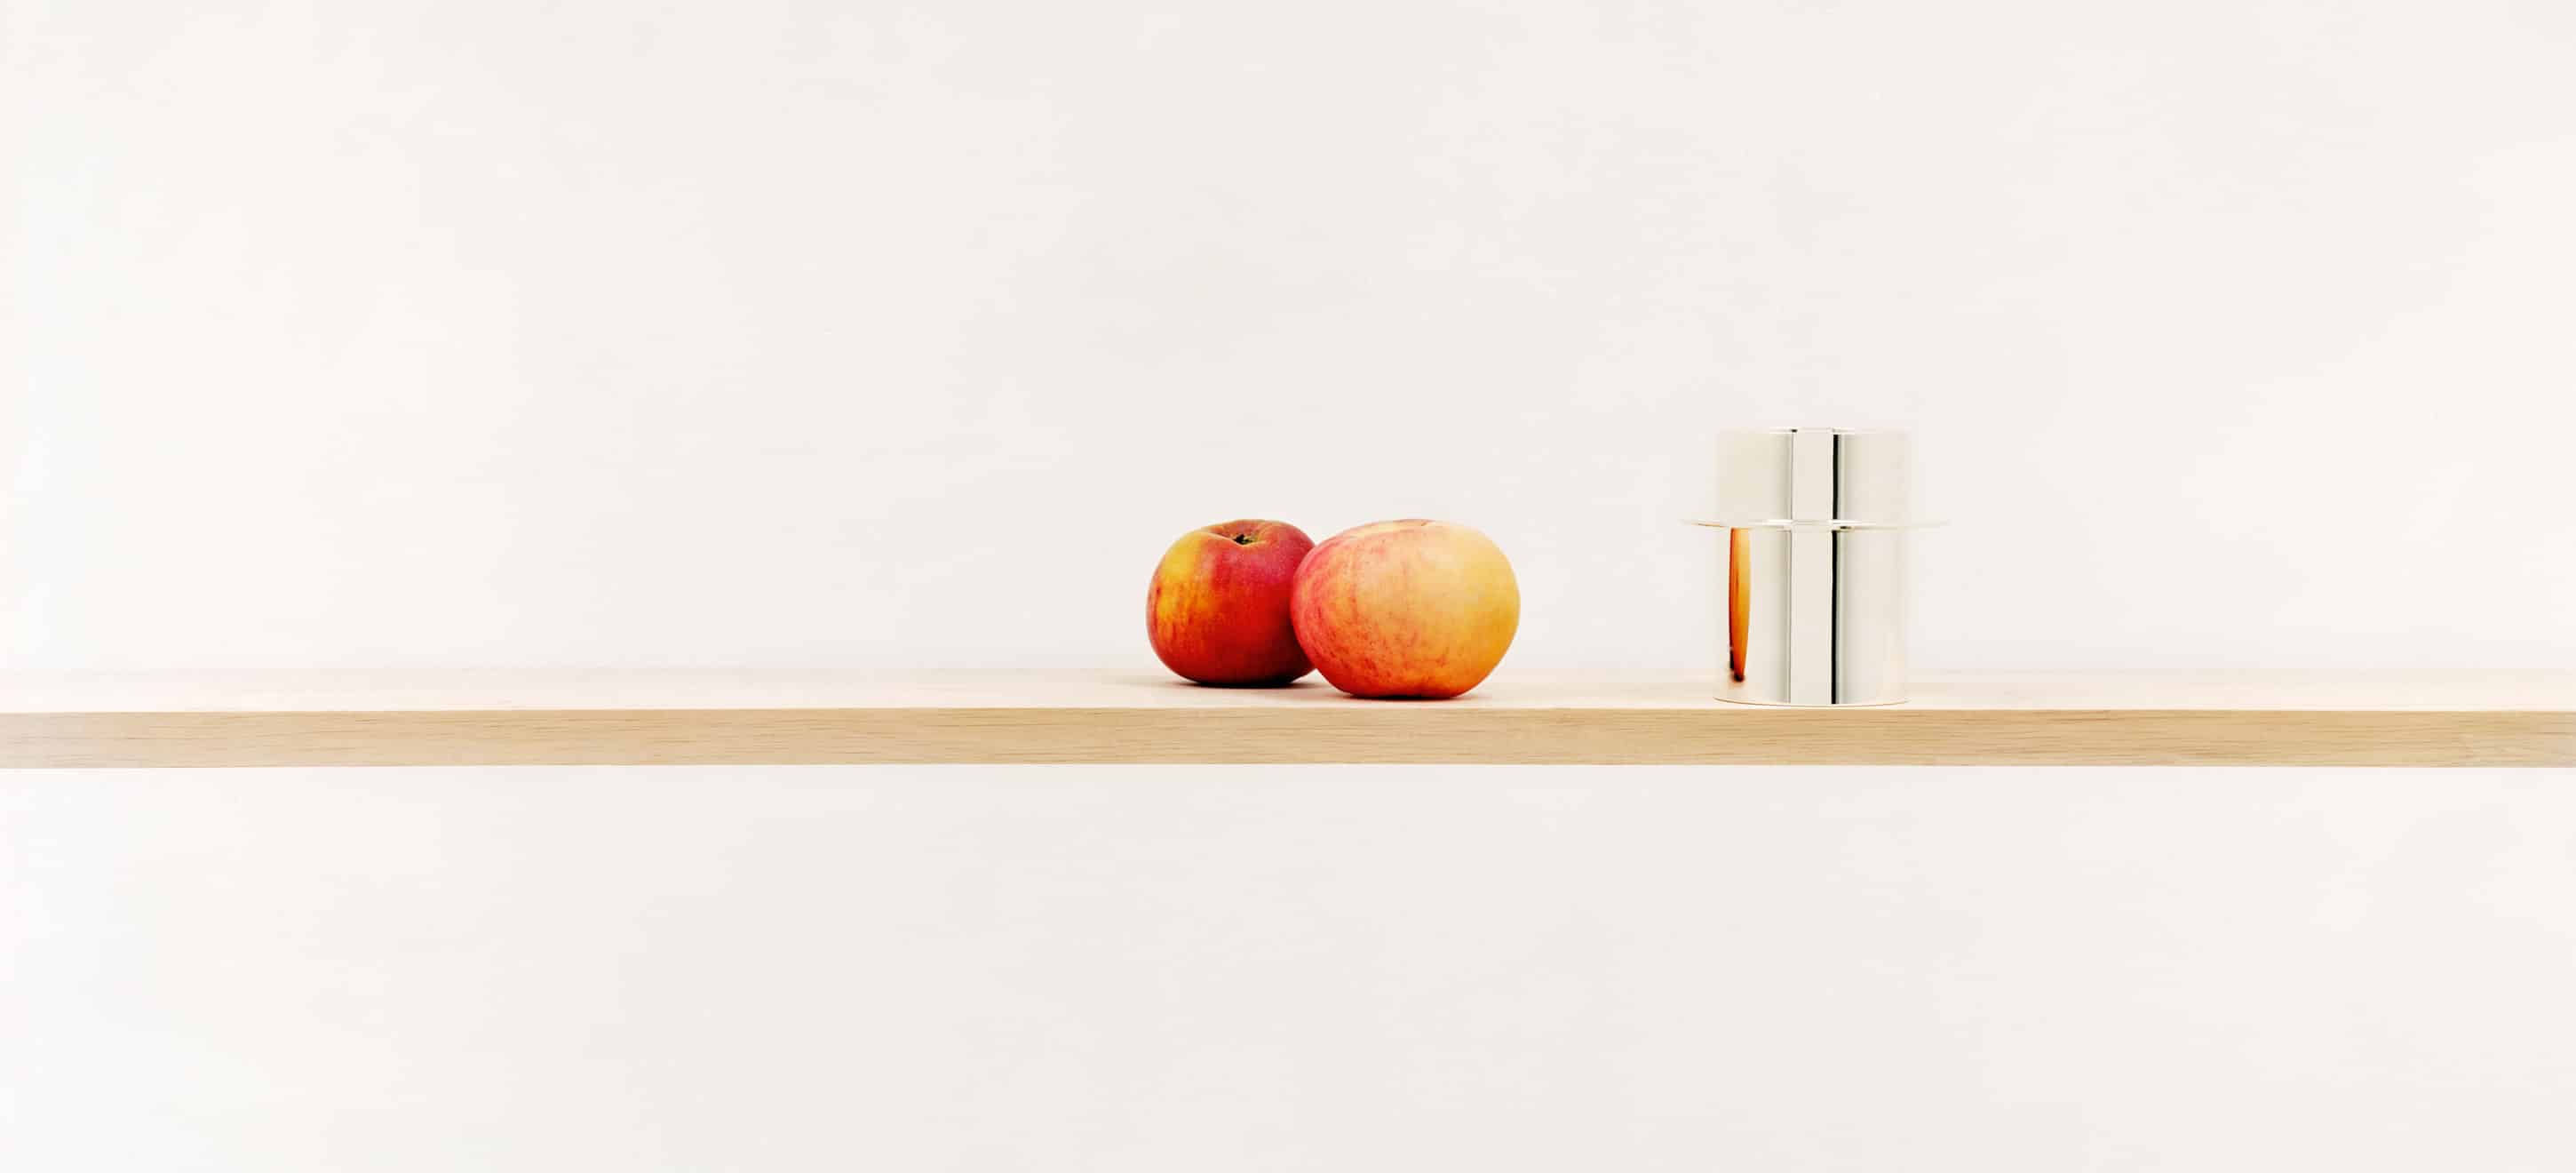 Mug from Dinner Service collection on a shelf standing next to a pair of apples